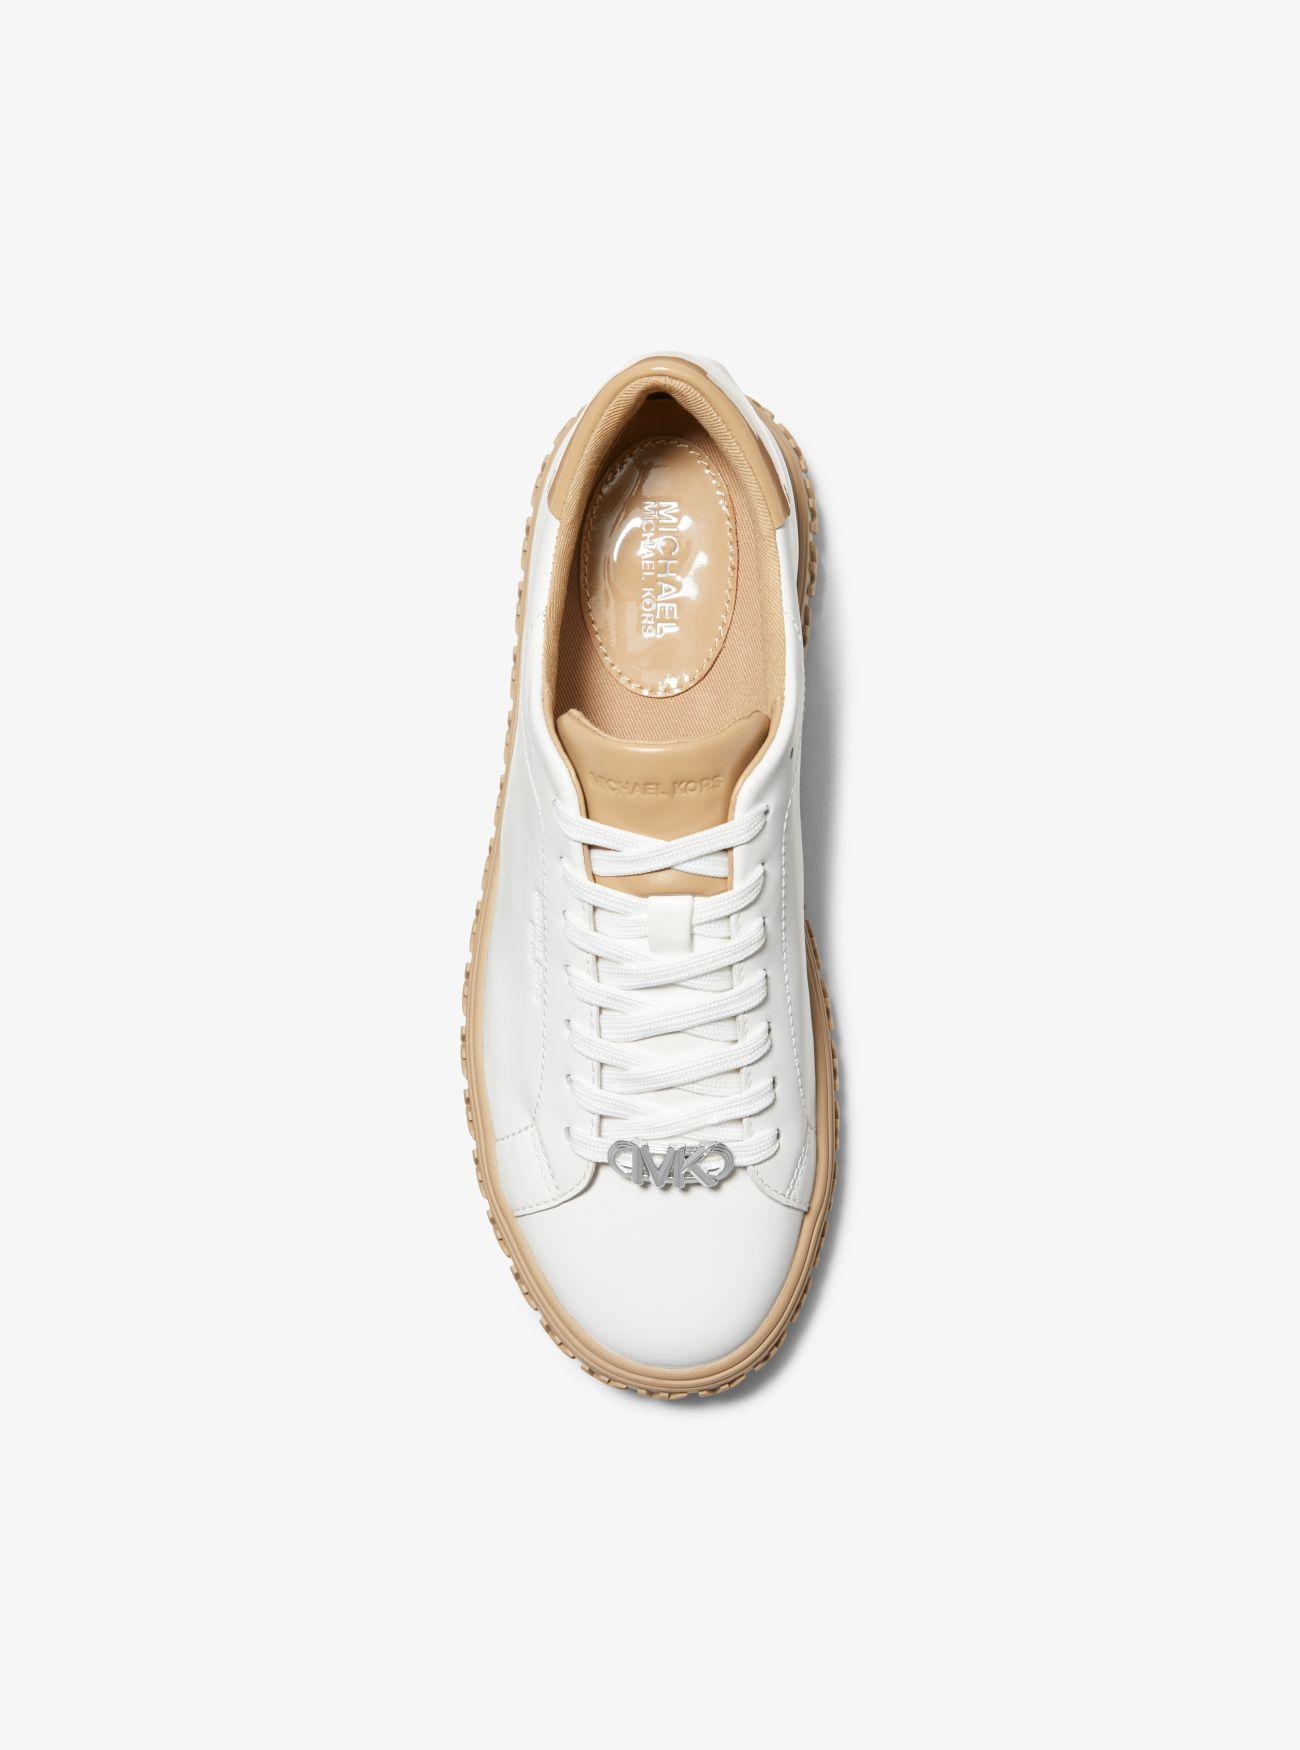 Michael Kors Grove Two-tone Leather Sneaker in White | Lyst UK